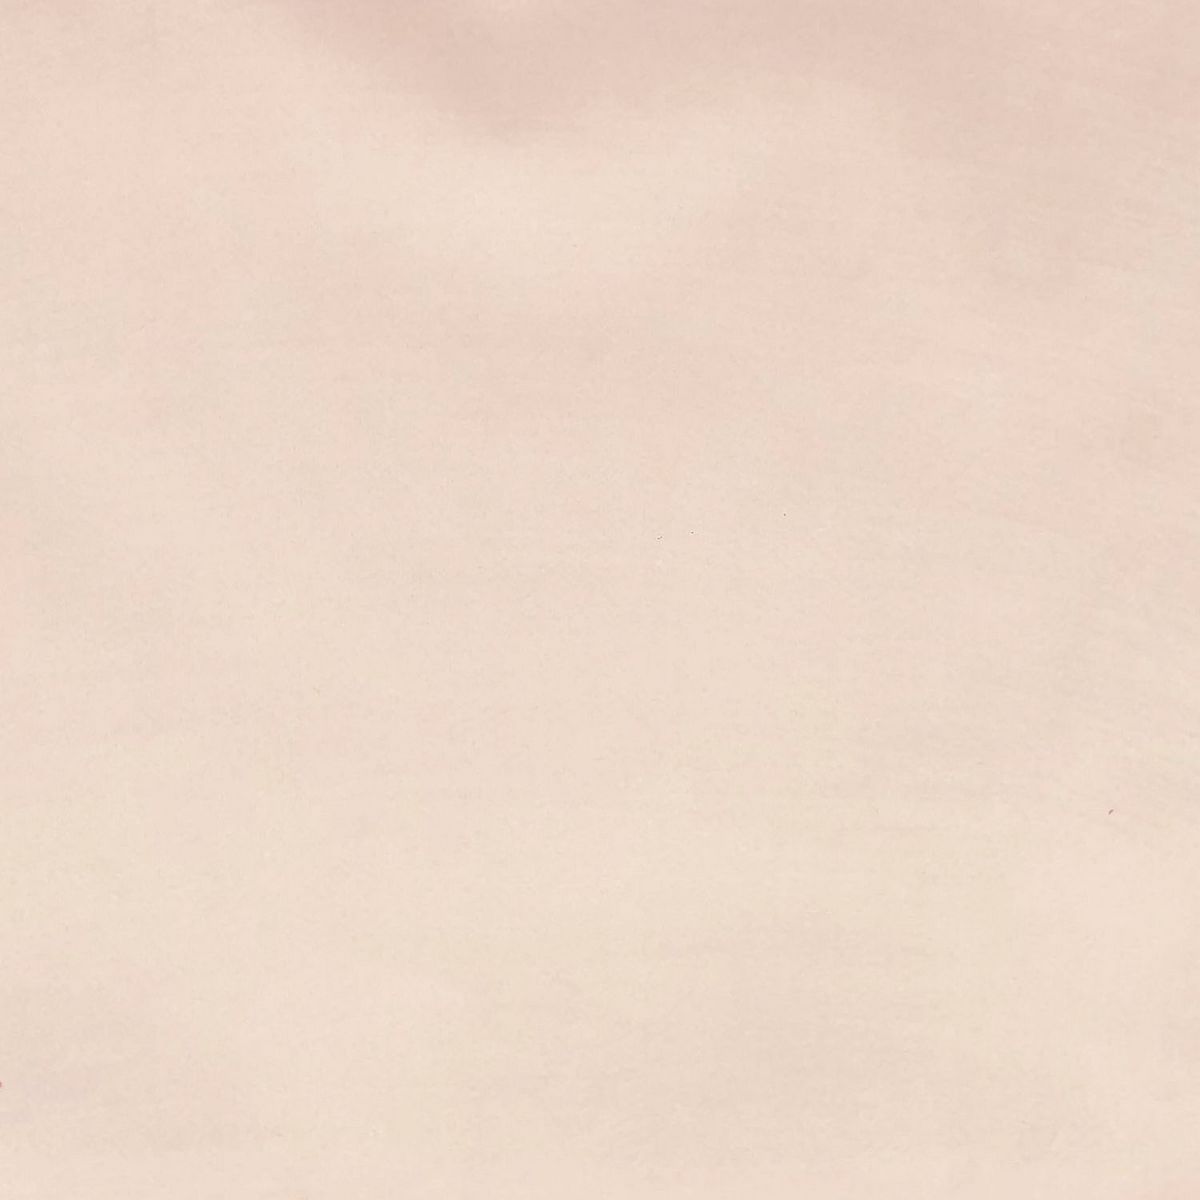 London Baby Pink Fabric by Chatham Glyn